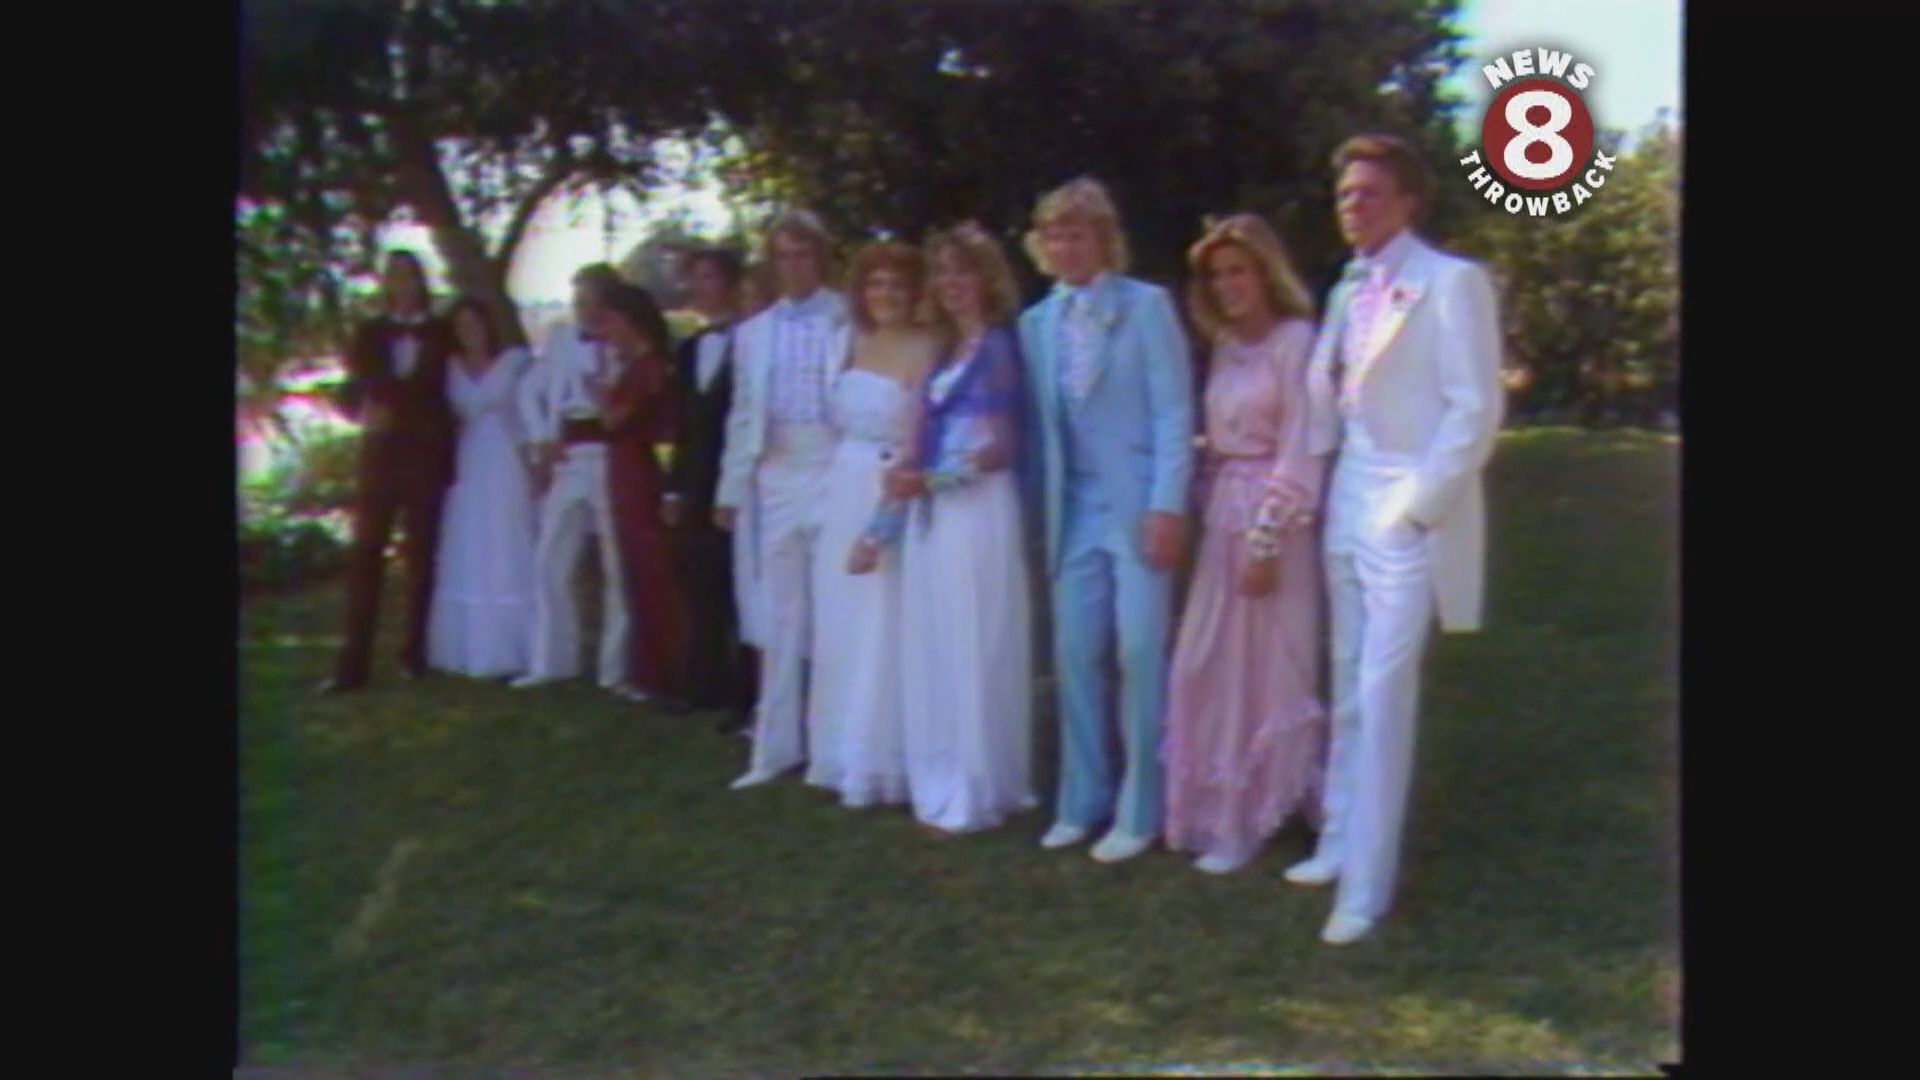 June 4, 1982 Reed Galin meets students getting ready for prom...Yvonne and Laura and their dates Danny and Scott.